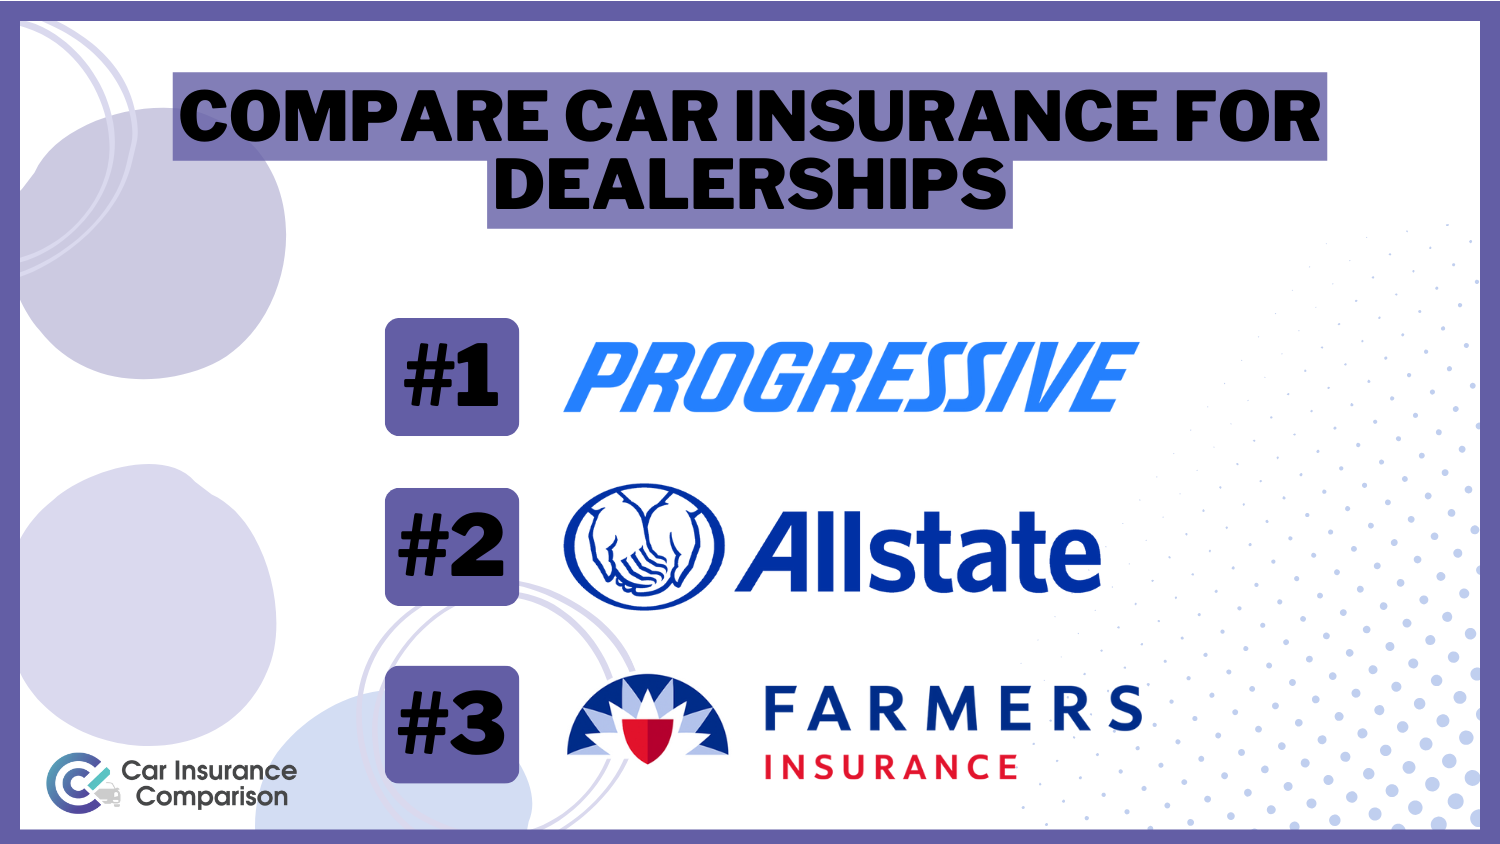 Compare Car Insurance for Dealerships: Rates, Discounts, & Requirements: Progressive, Allstate and Farmers